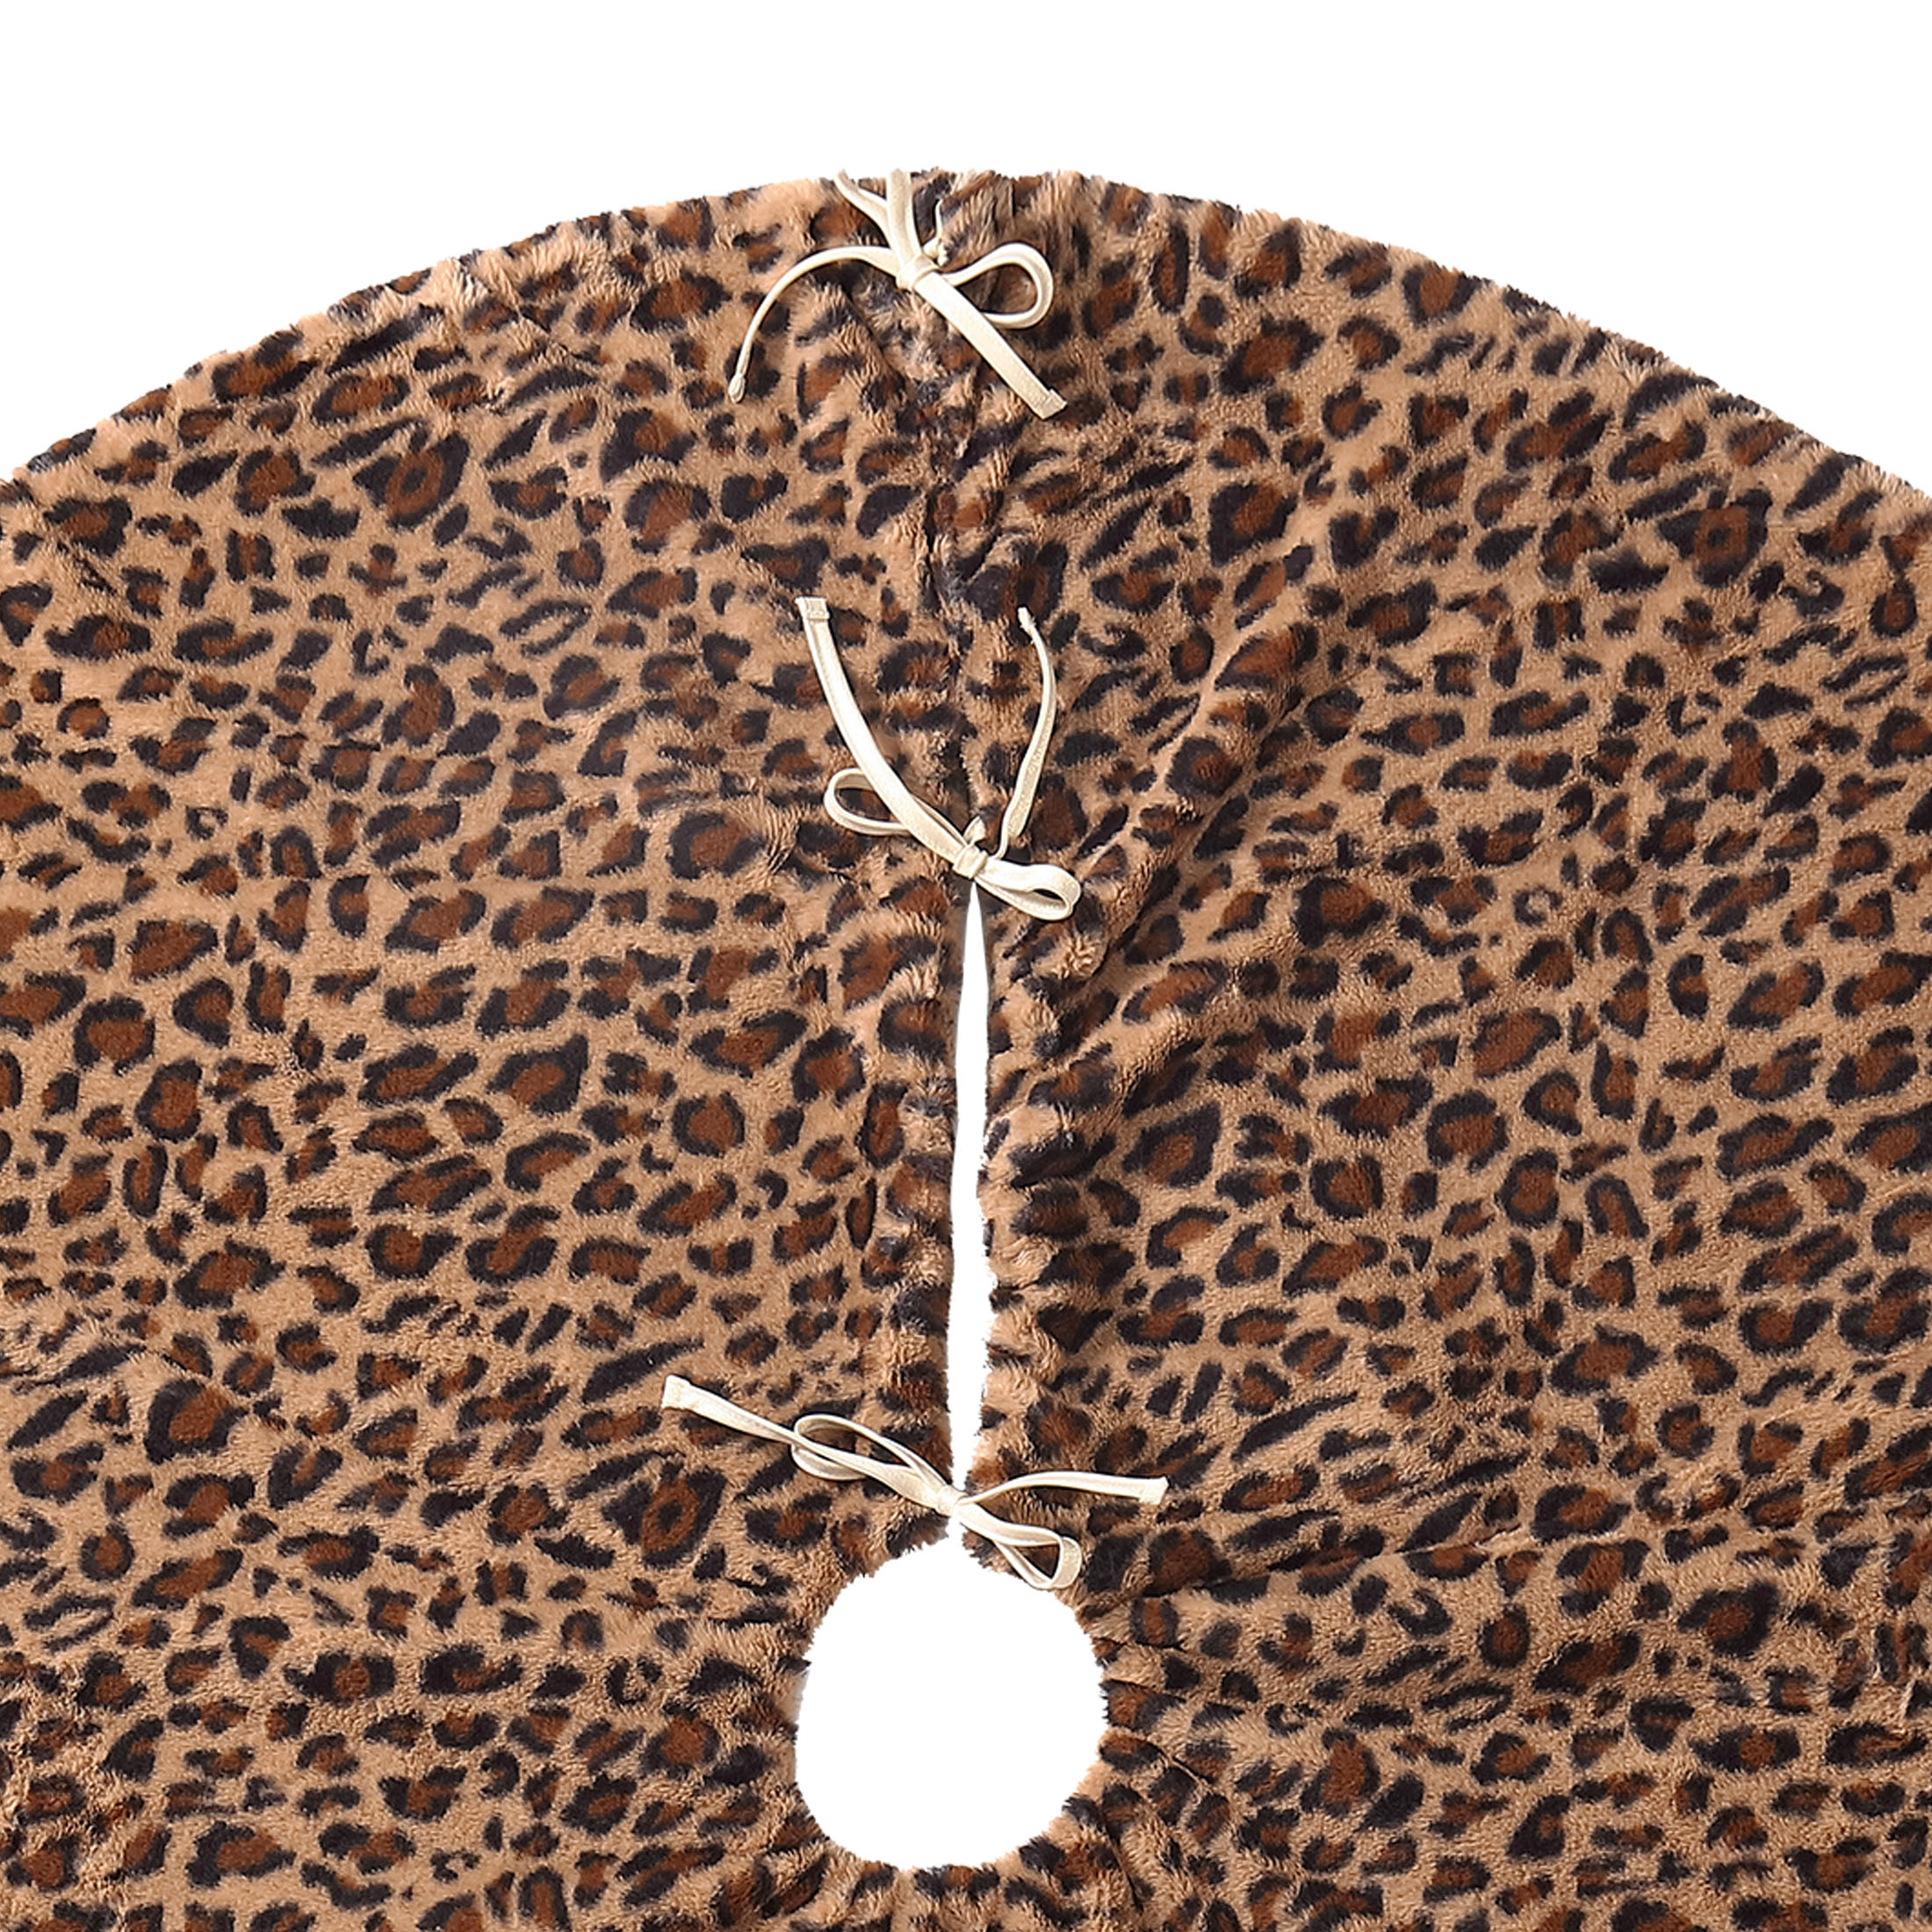 Holiday Time, Rabbit Faux Fur Leopard Print Tree Skirt, 56" - image 5 of 5